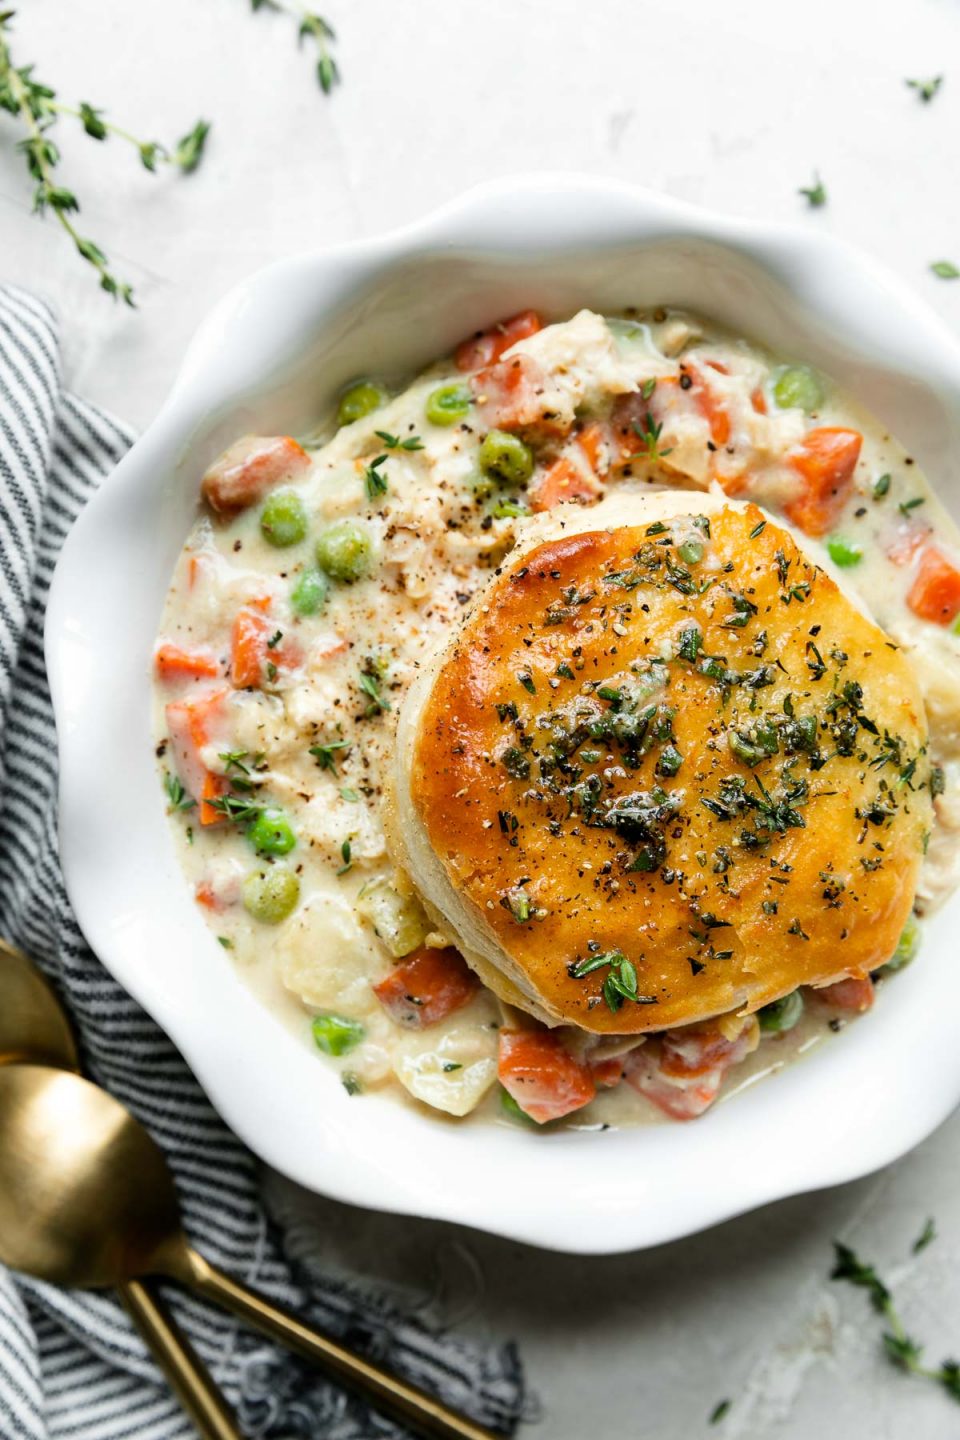 An overhead shot of Skillet Chicken Pot Pie with Biscuits served on a white plate with scalloped edges that rest atop a creamy white textured surface. Two gold spoons, a blue and white striped linen napkin, and a few sprigs of fresh thyme surround the plate.